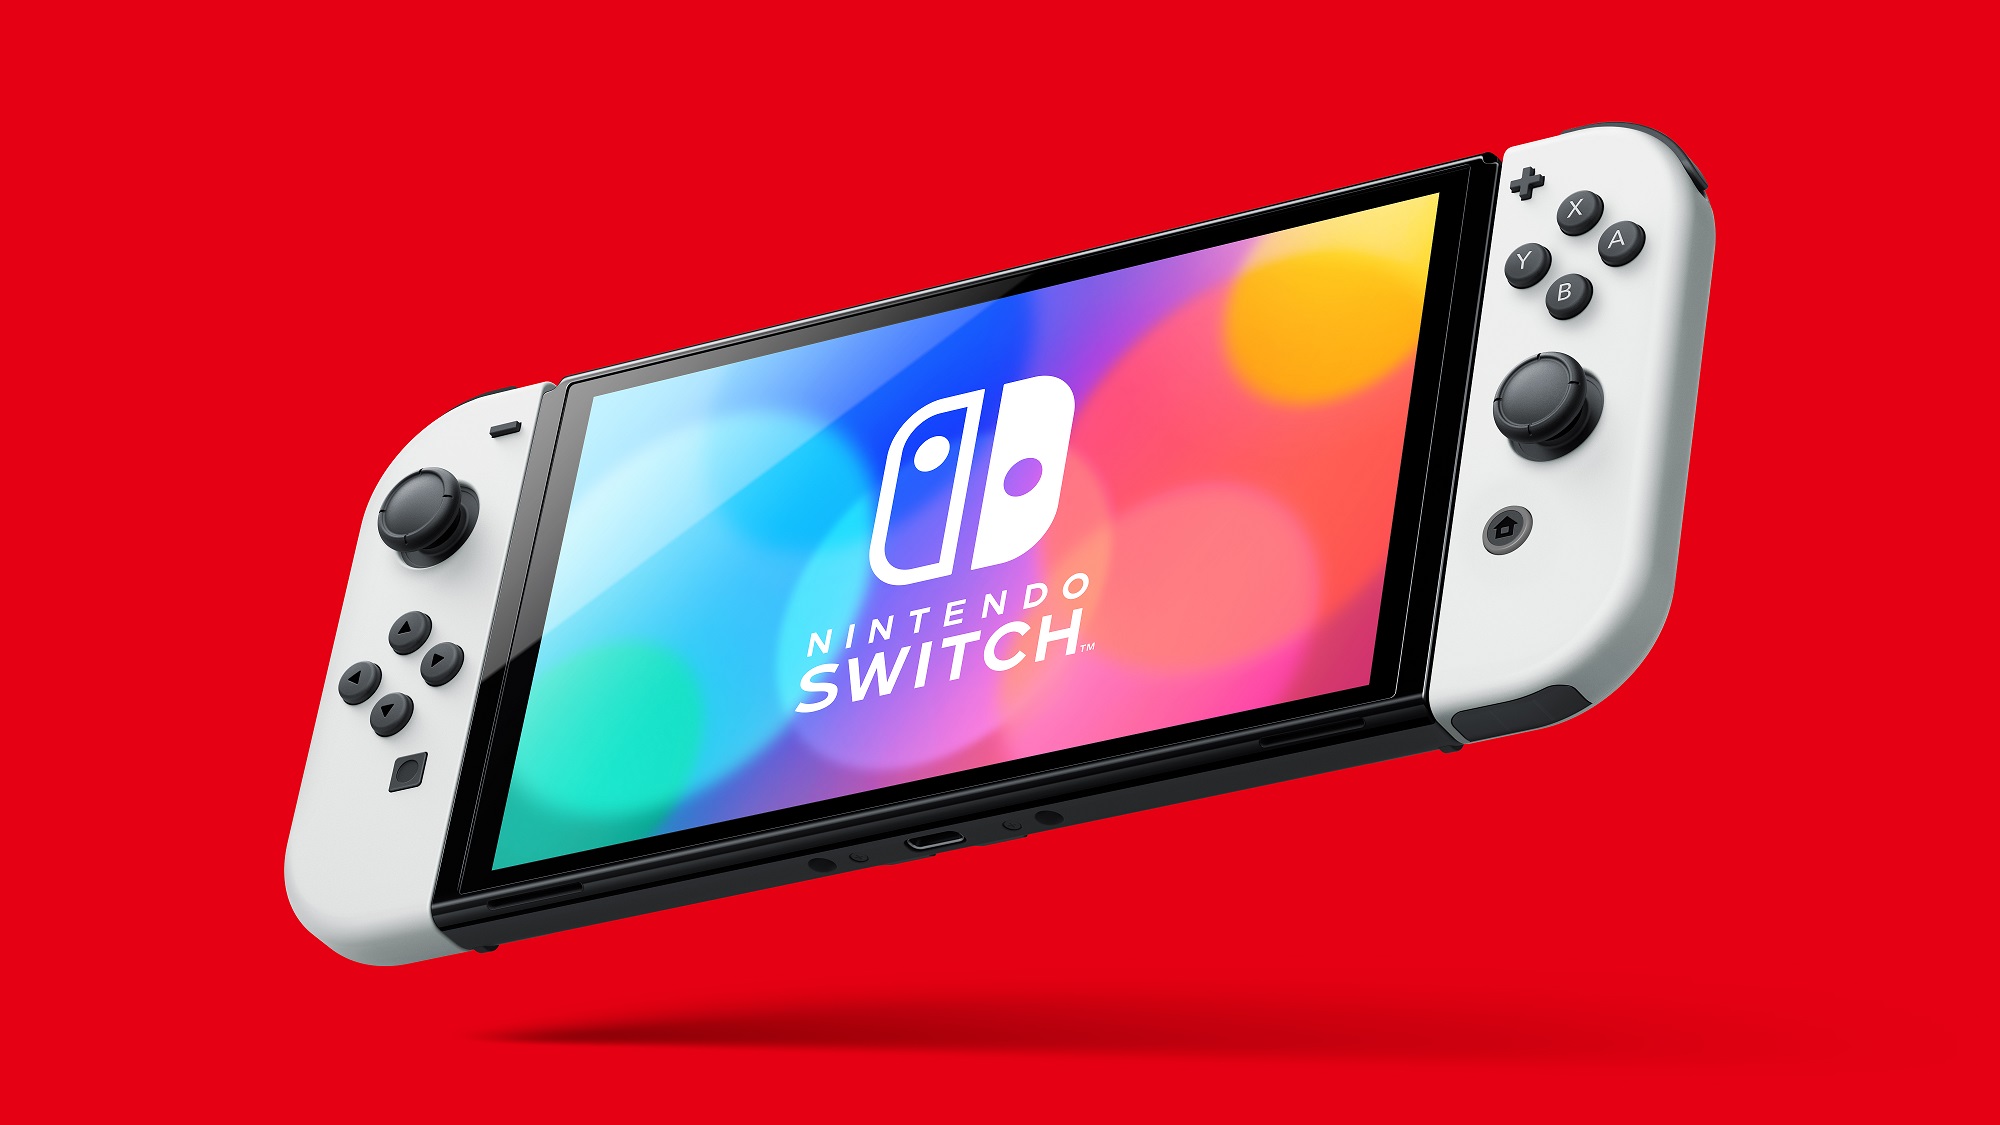 Nintendo announces new Switch OLED model with larger screen